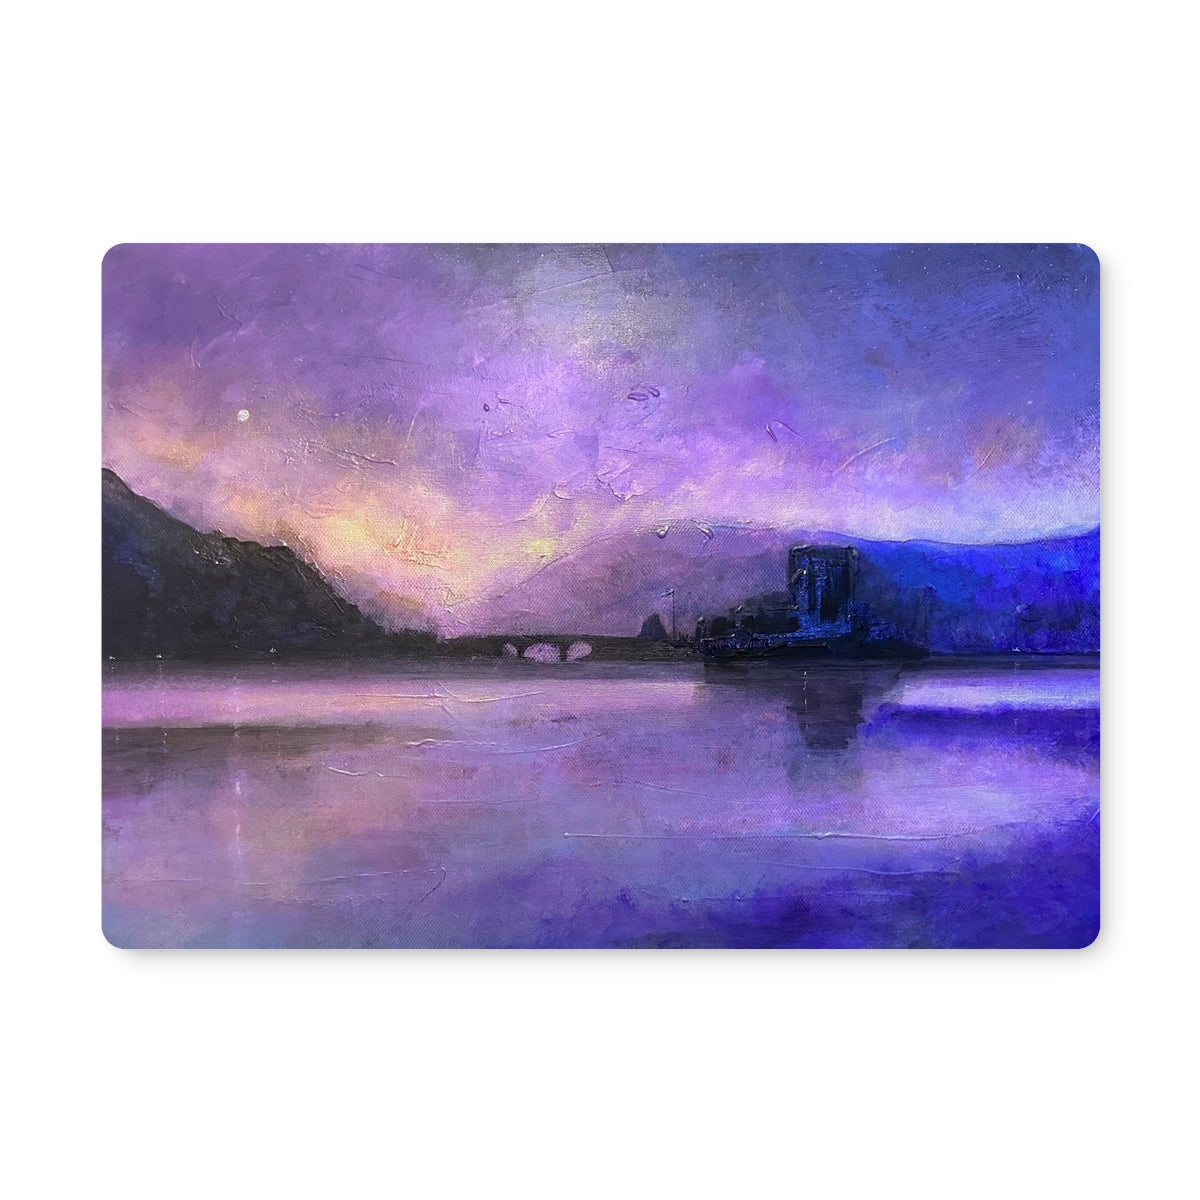 Eilean Donan Castle Moonset Art Gifts Placemat-Placemats-Historic & Iconic Scotland Art Gallery-6 Placemats-Paintings, Prints, Homeware, Art Gifts From Scotland By Scottish Artist Kevin Hunter